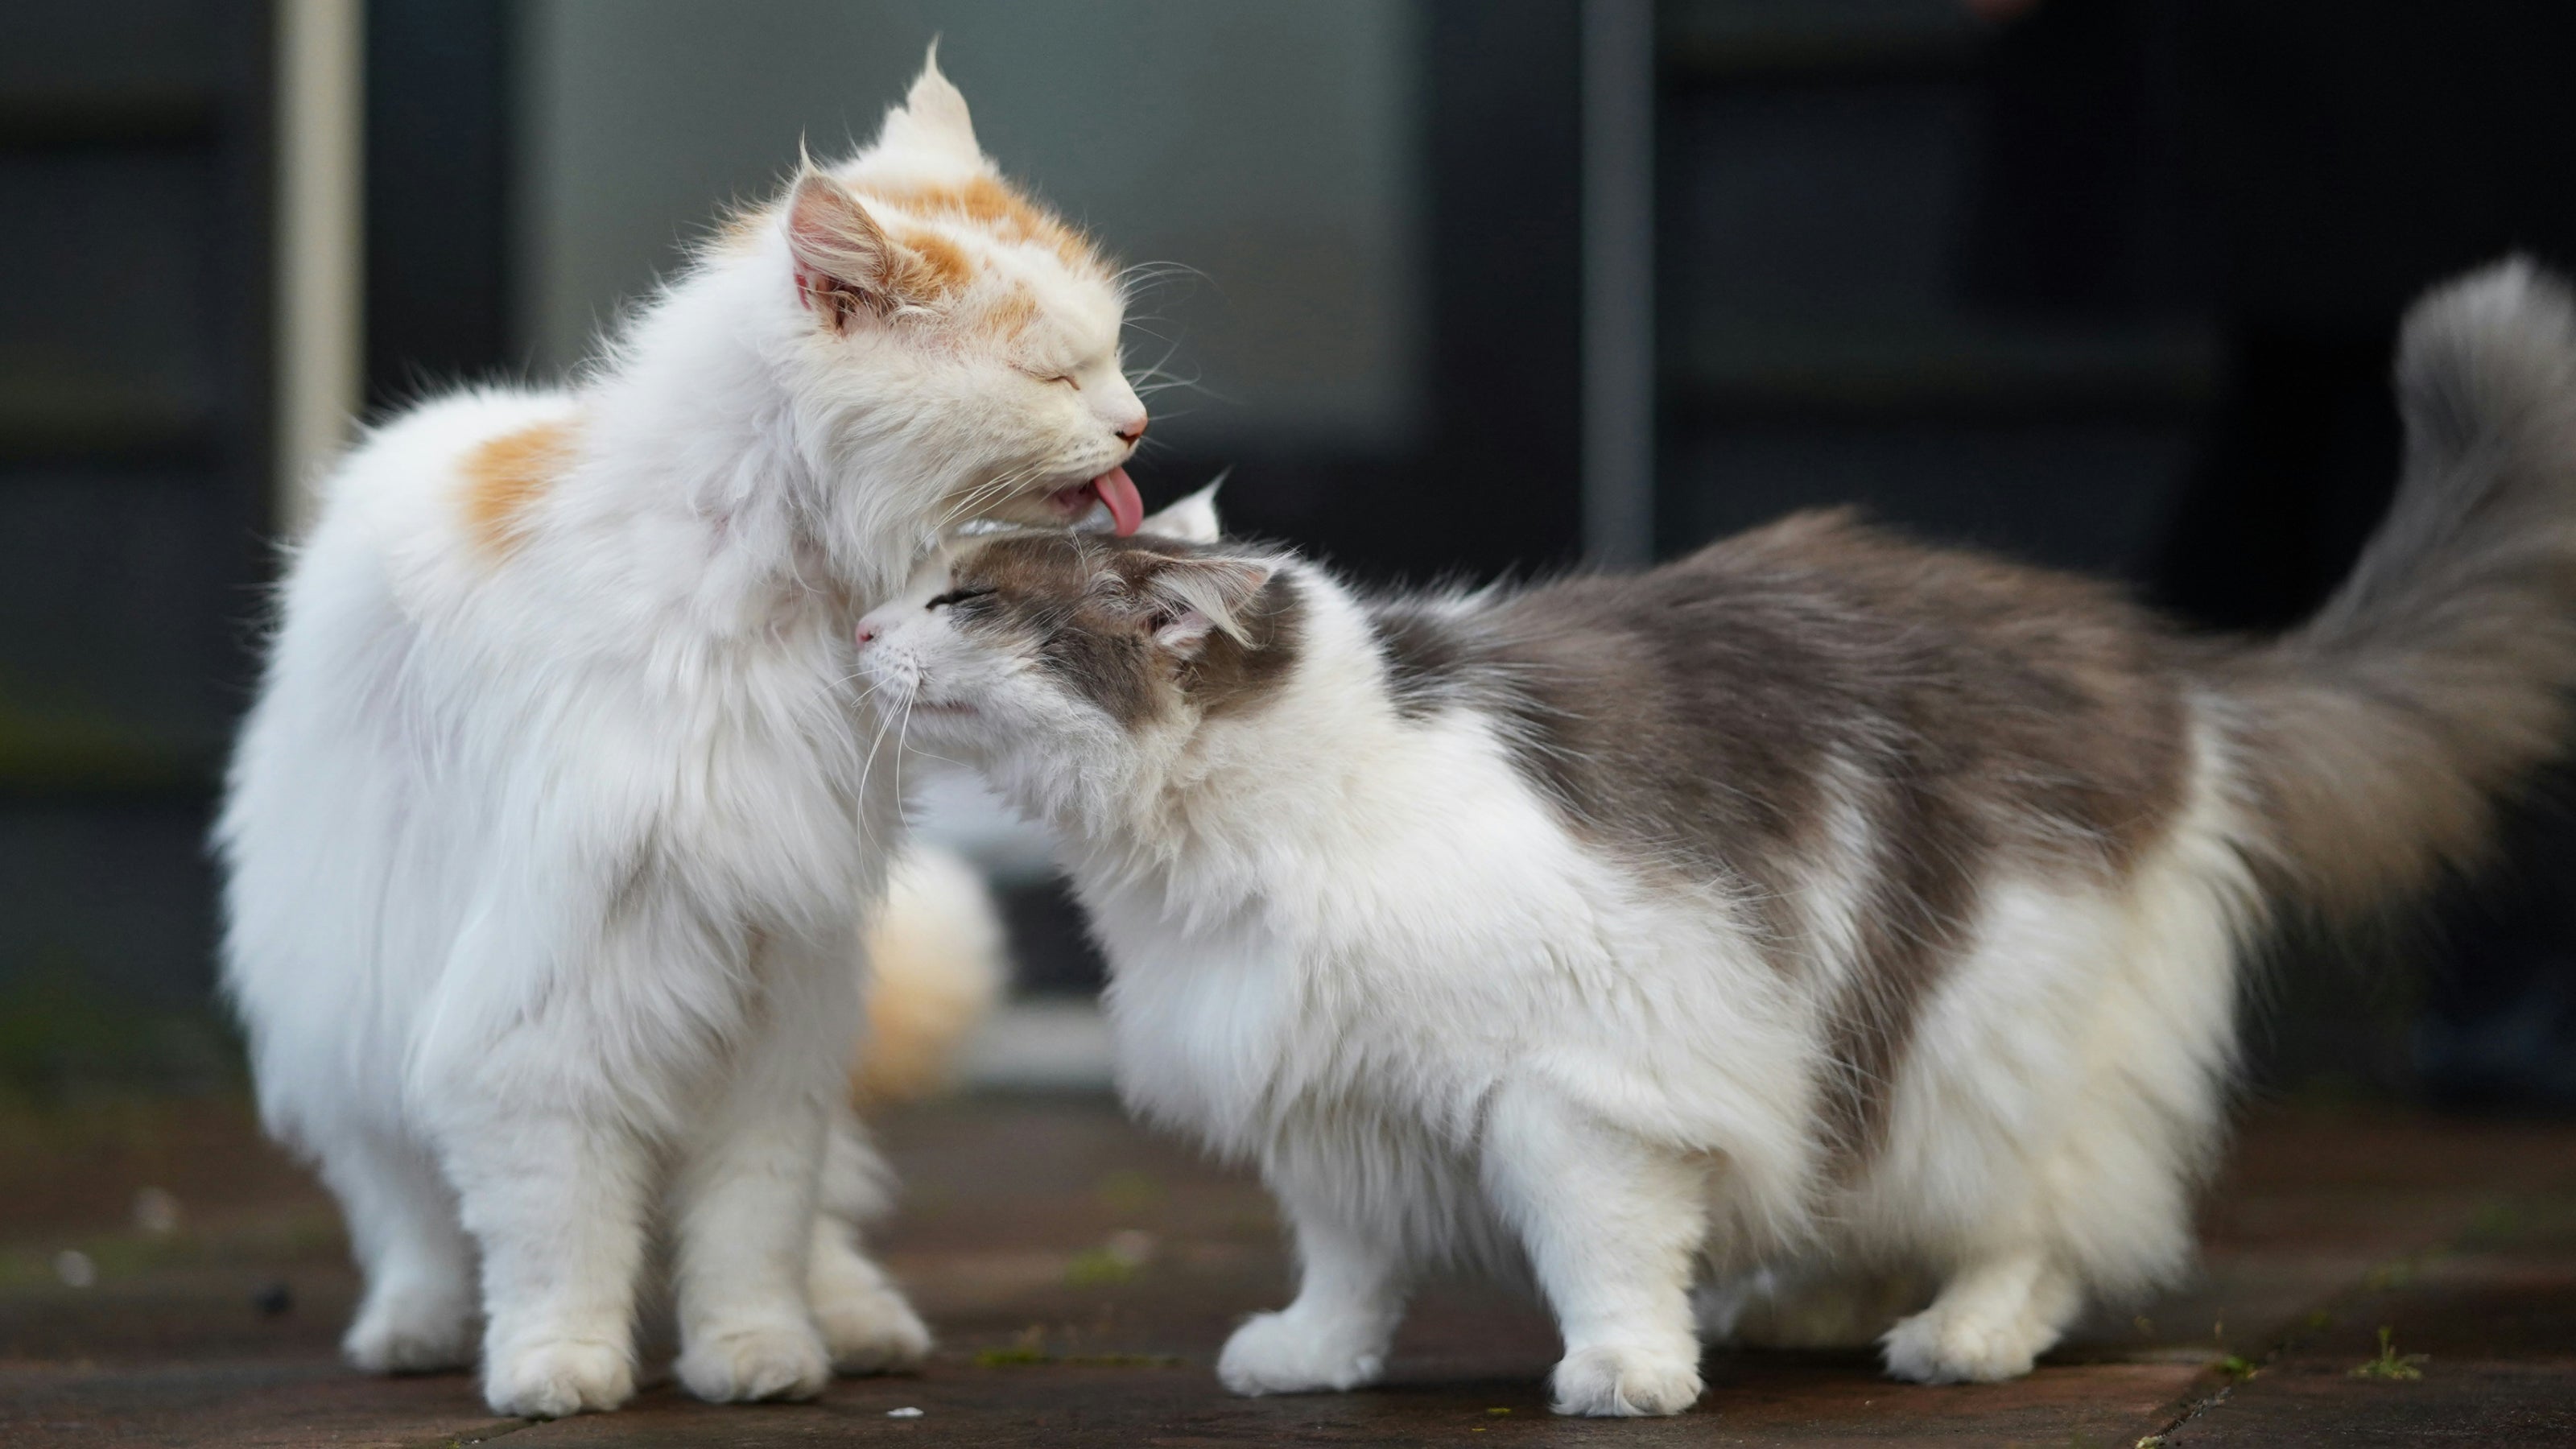 A cat licking the head of another cat and grooming outdoors